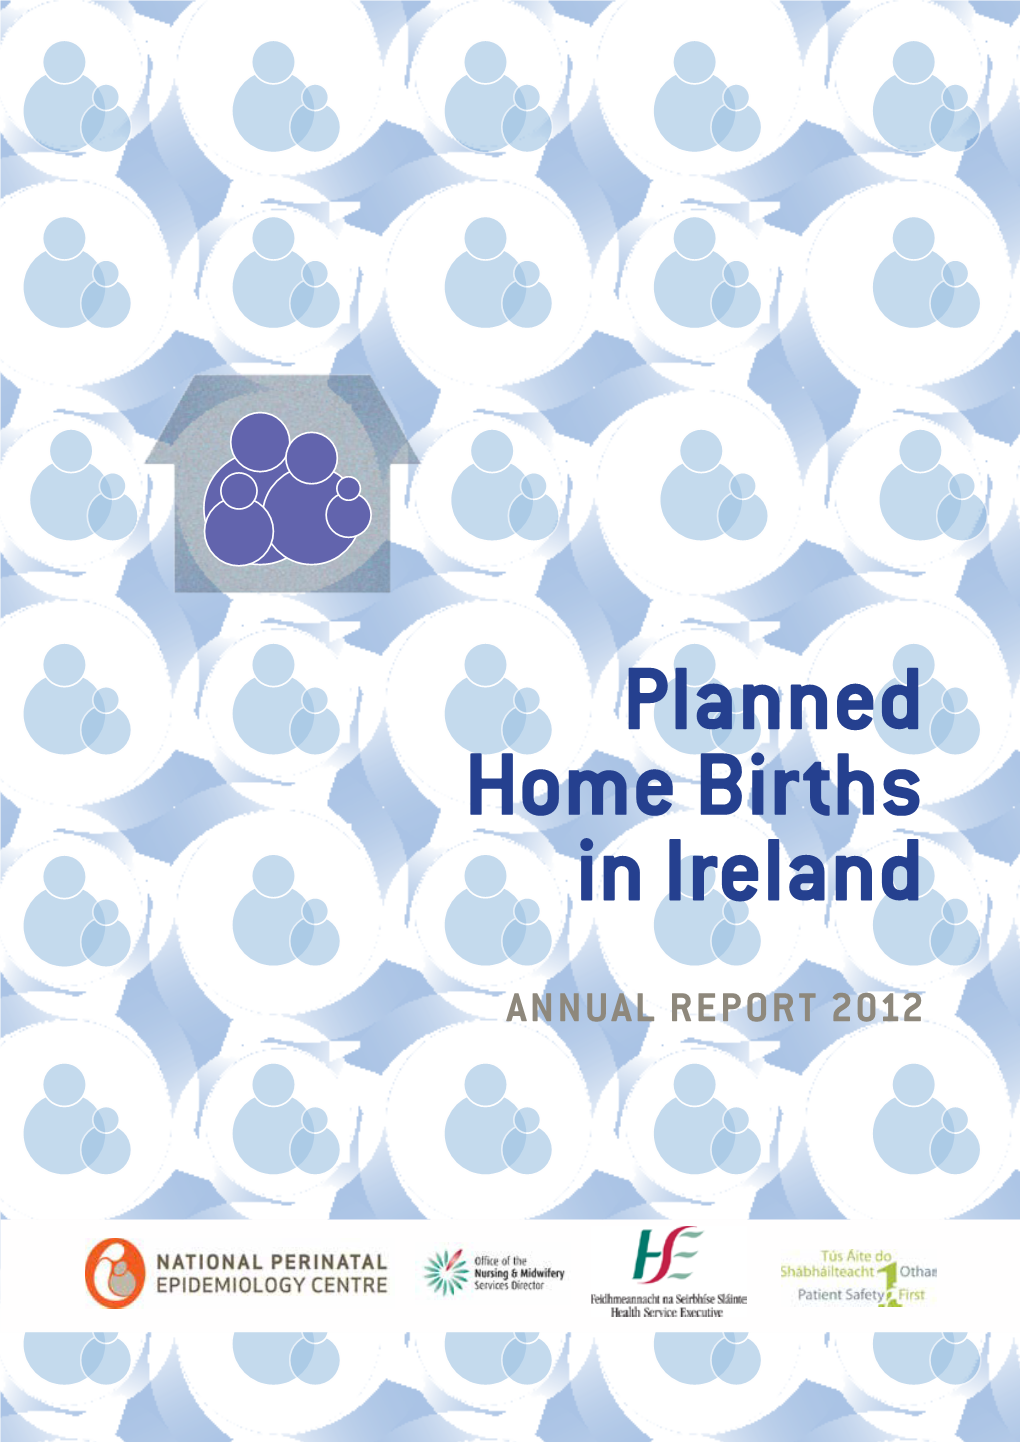 Planned Home Births in Ireland Annual Report 2012